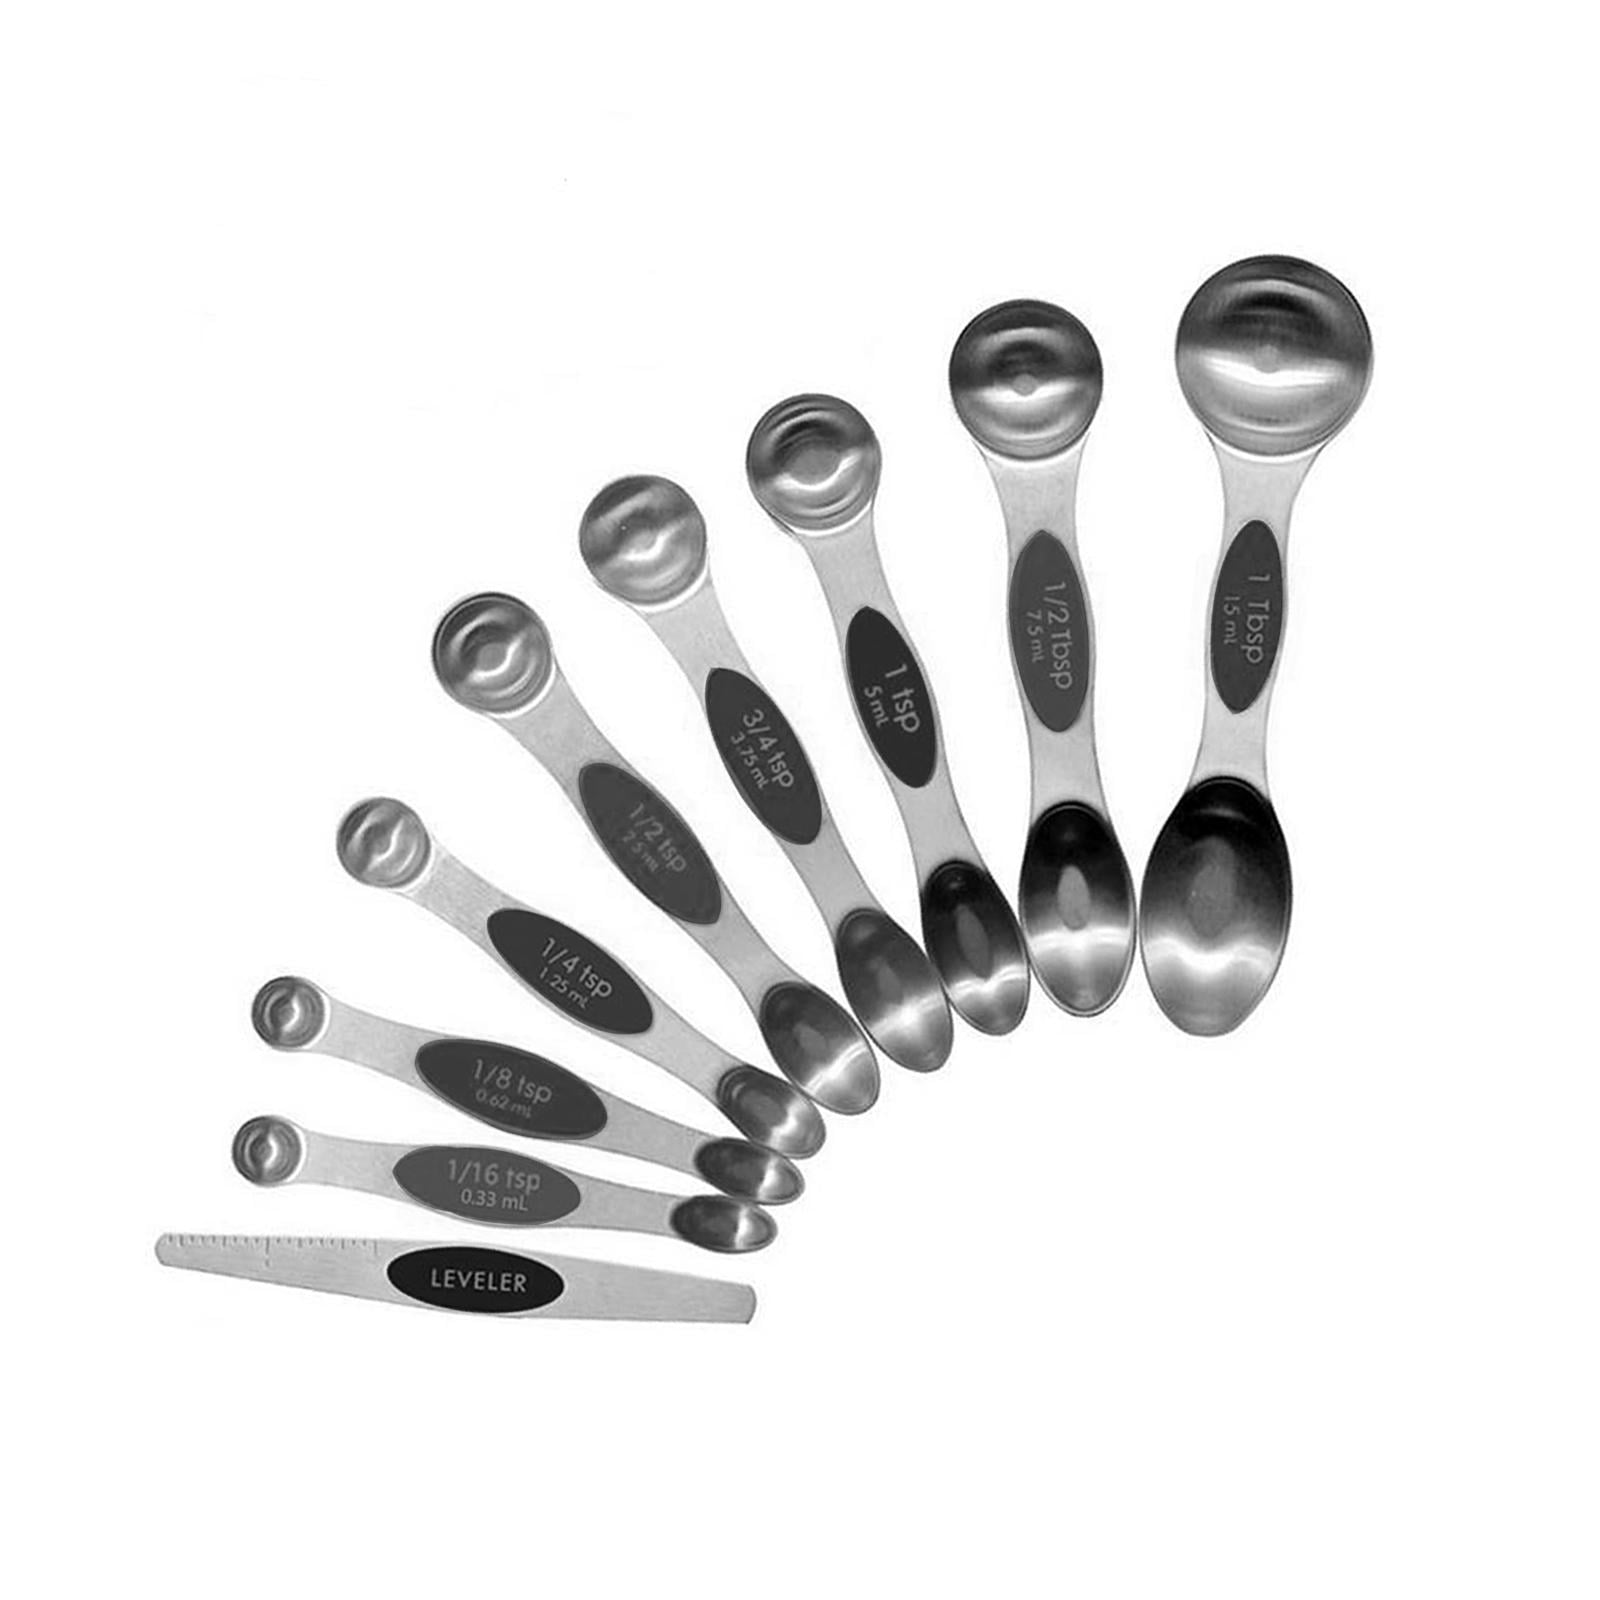 6 Pcs Magnetic Measuring Spoons Set Stainless Steel Dual Sided Stackable Teaspoons  Tablespoons for Dry or Liquid Fits in Spice - AliExpress